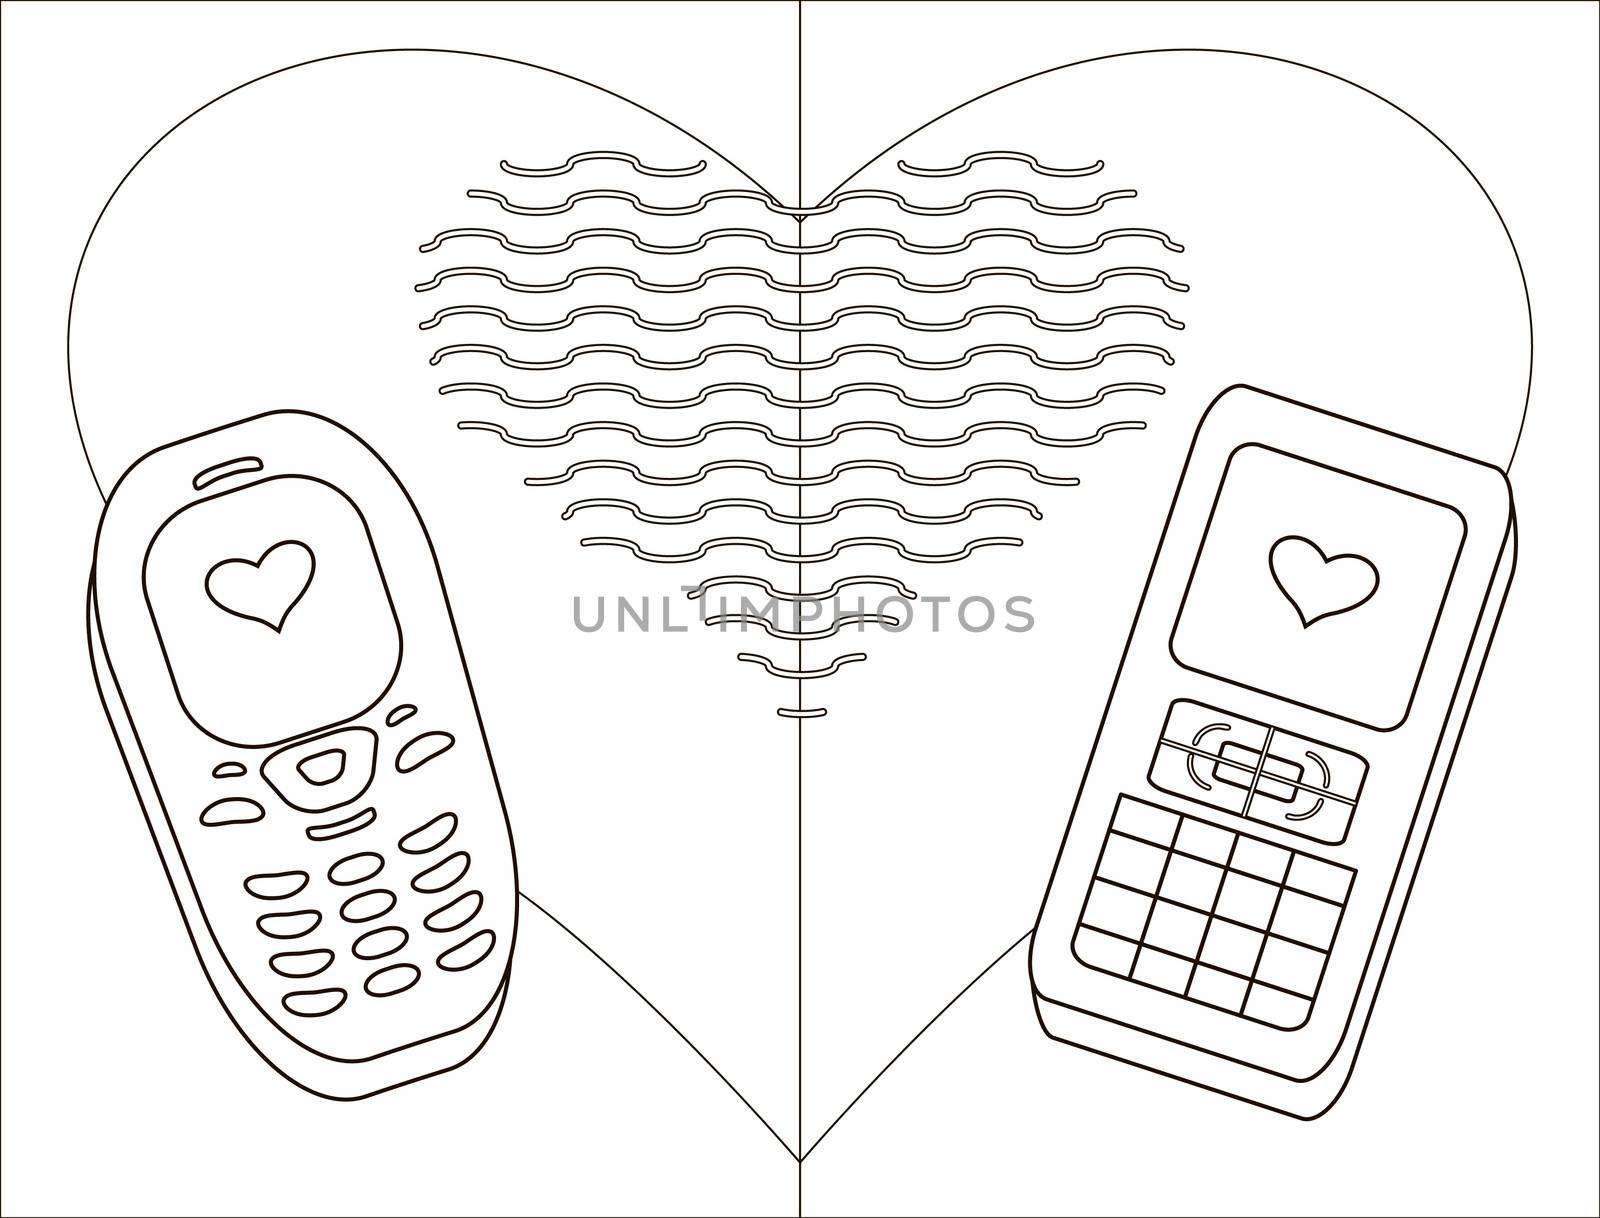 Mobile phones-enamoured, contours by alexcoolok